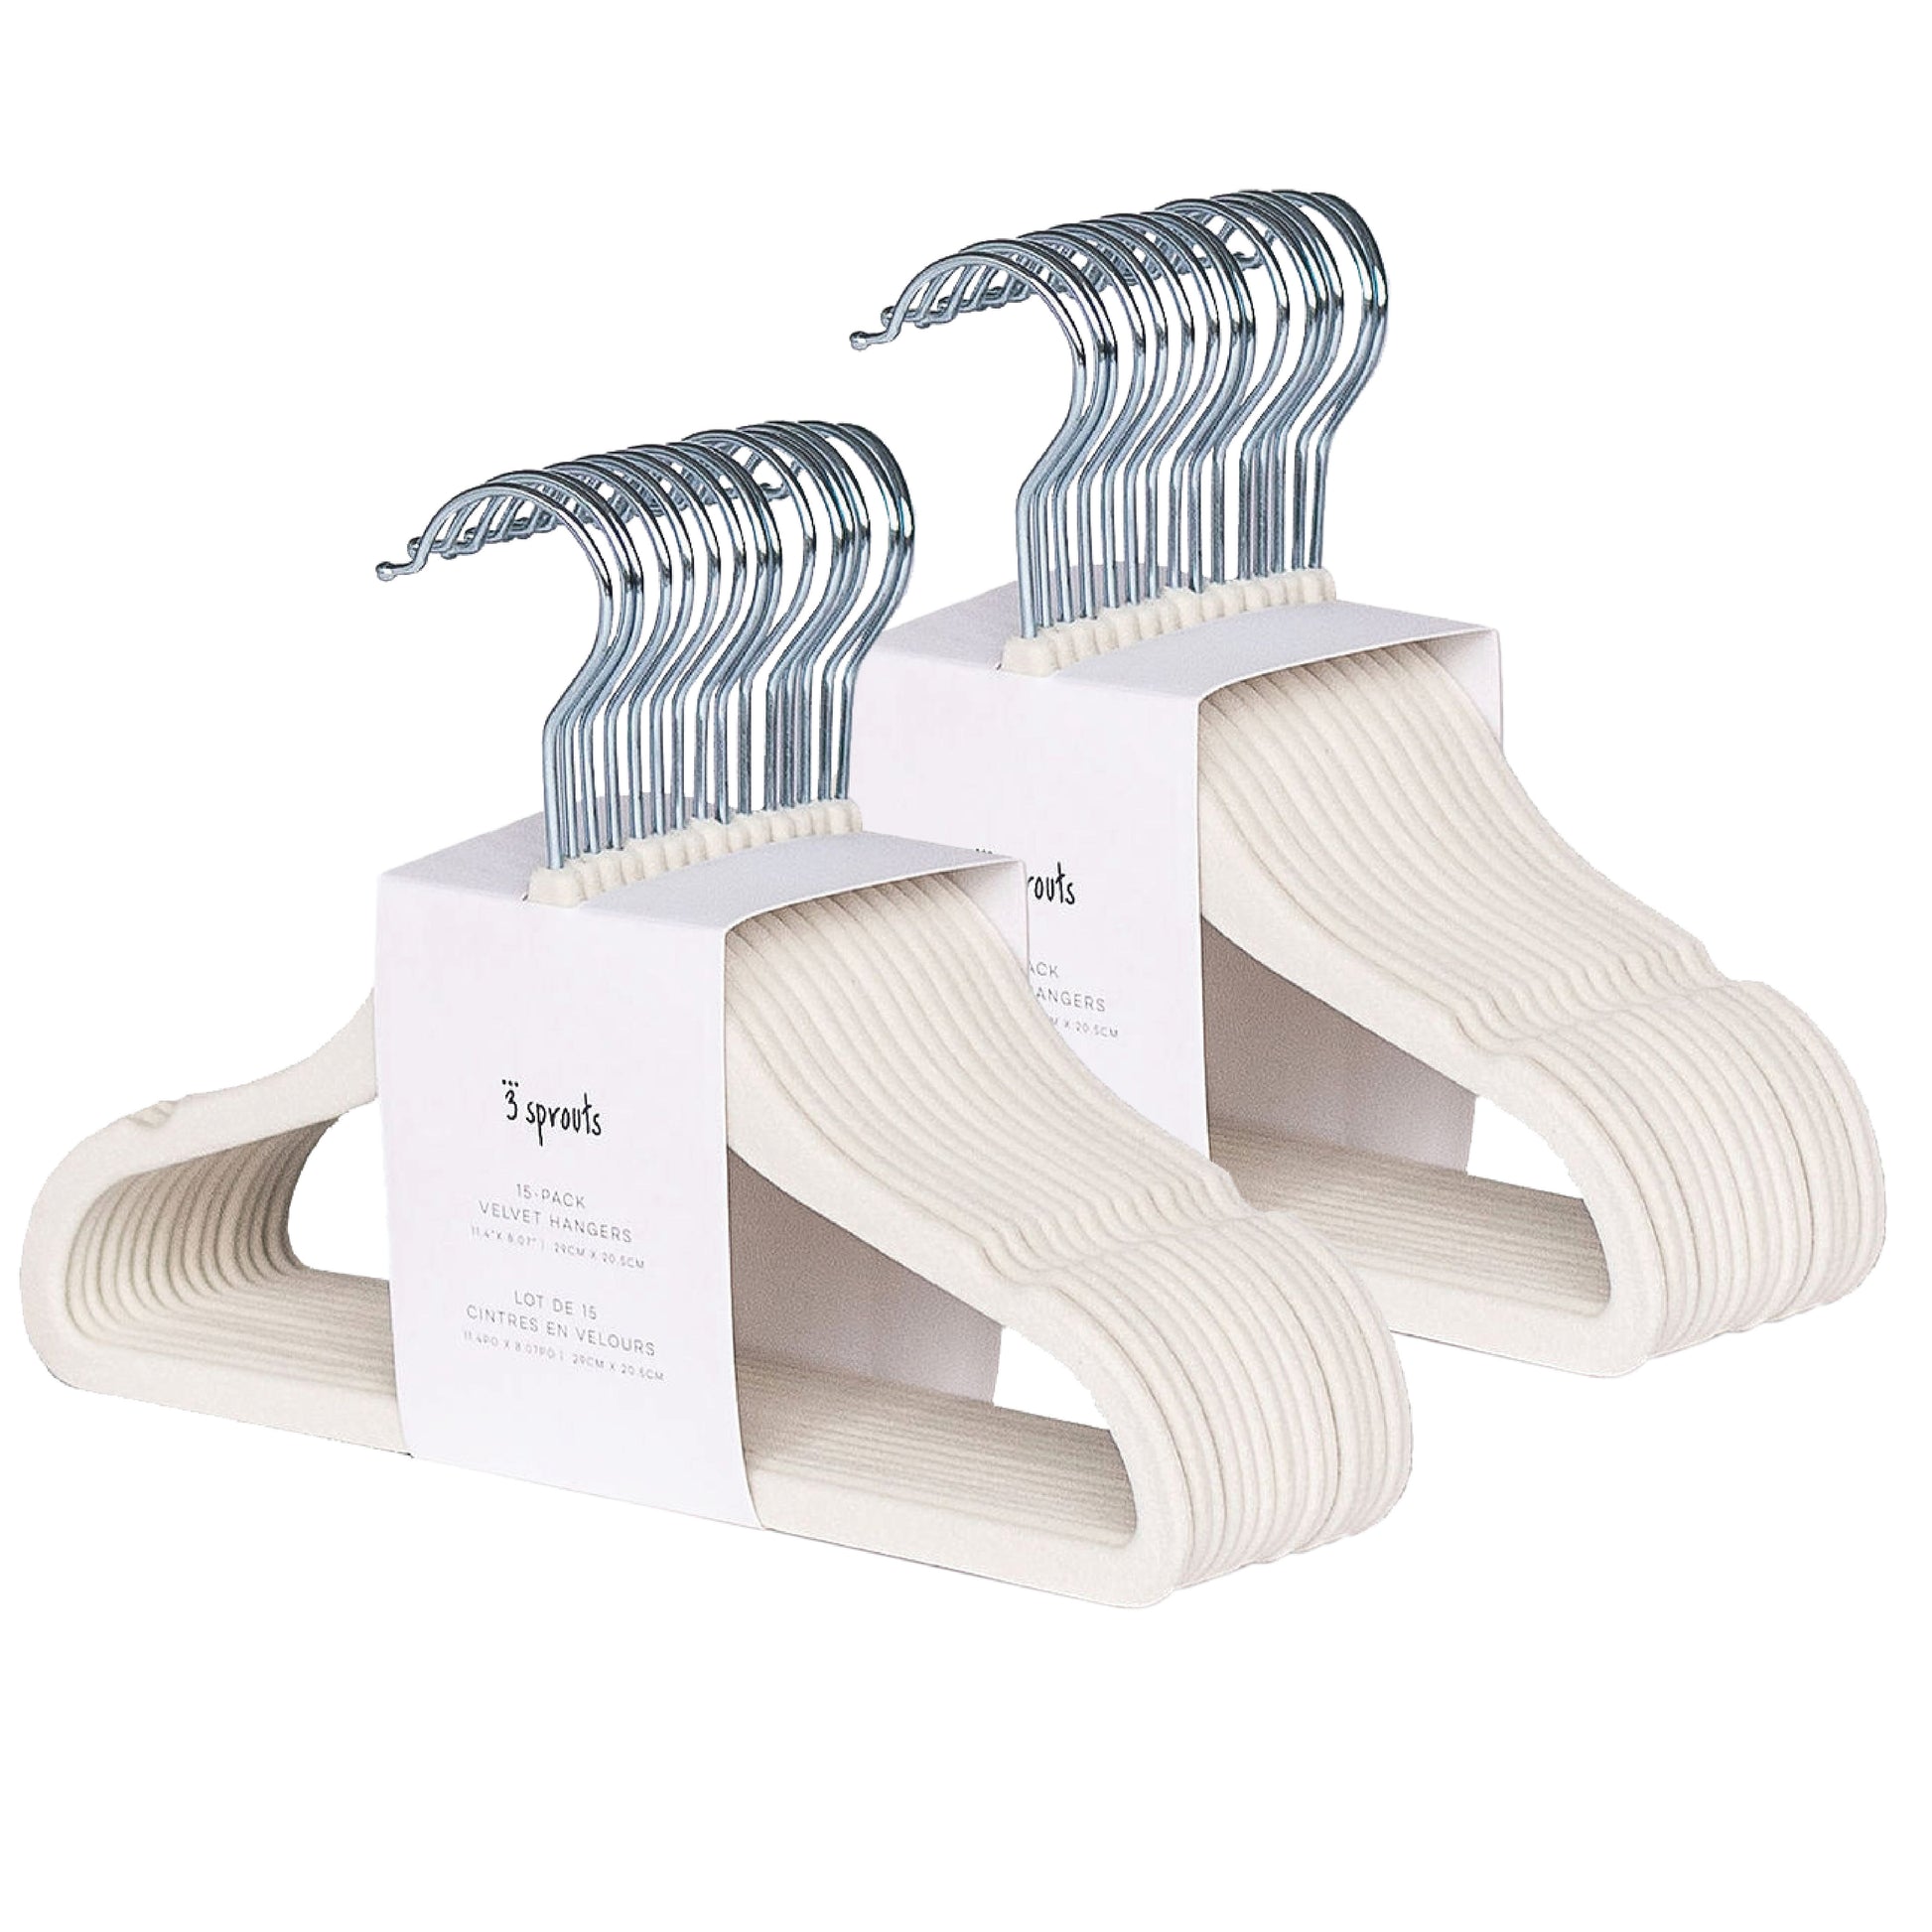  Uniware Cream Flocked Suede Clothes Hanger Pack, Set of 144 :  Home & Kitchen